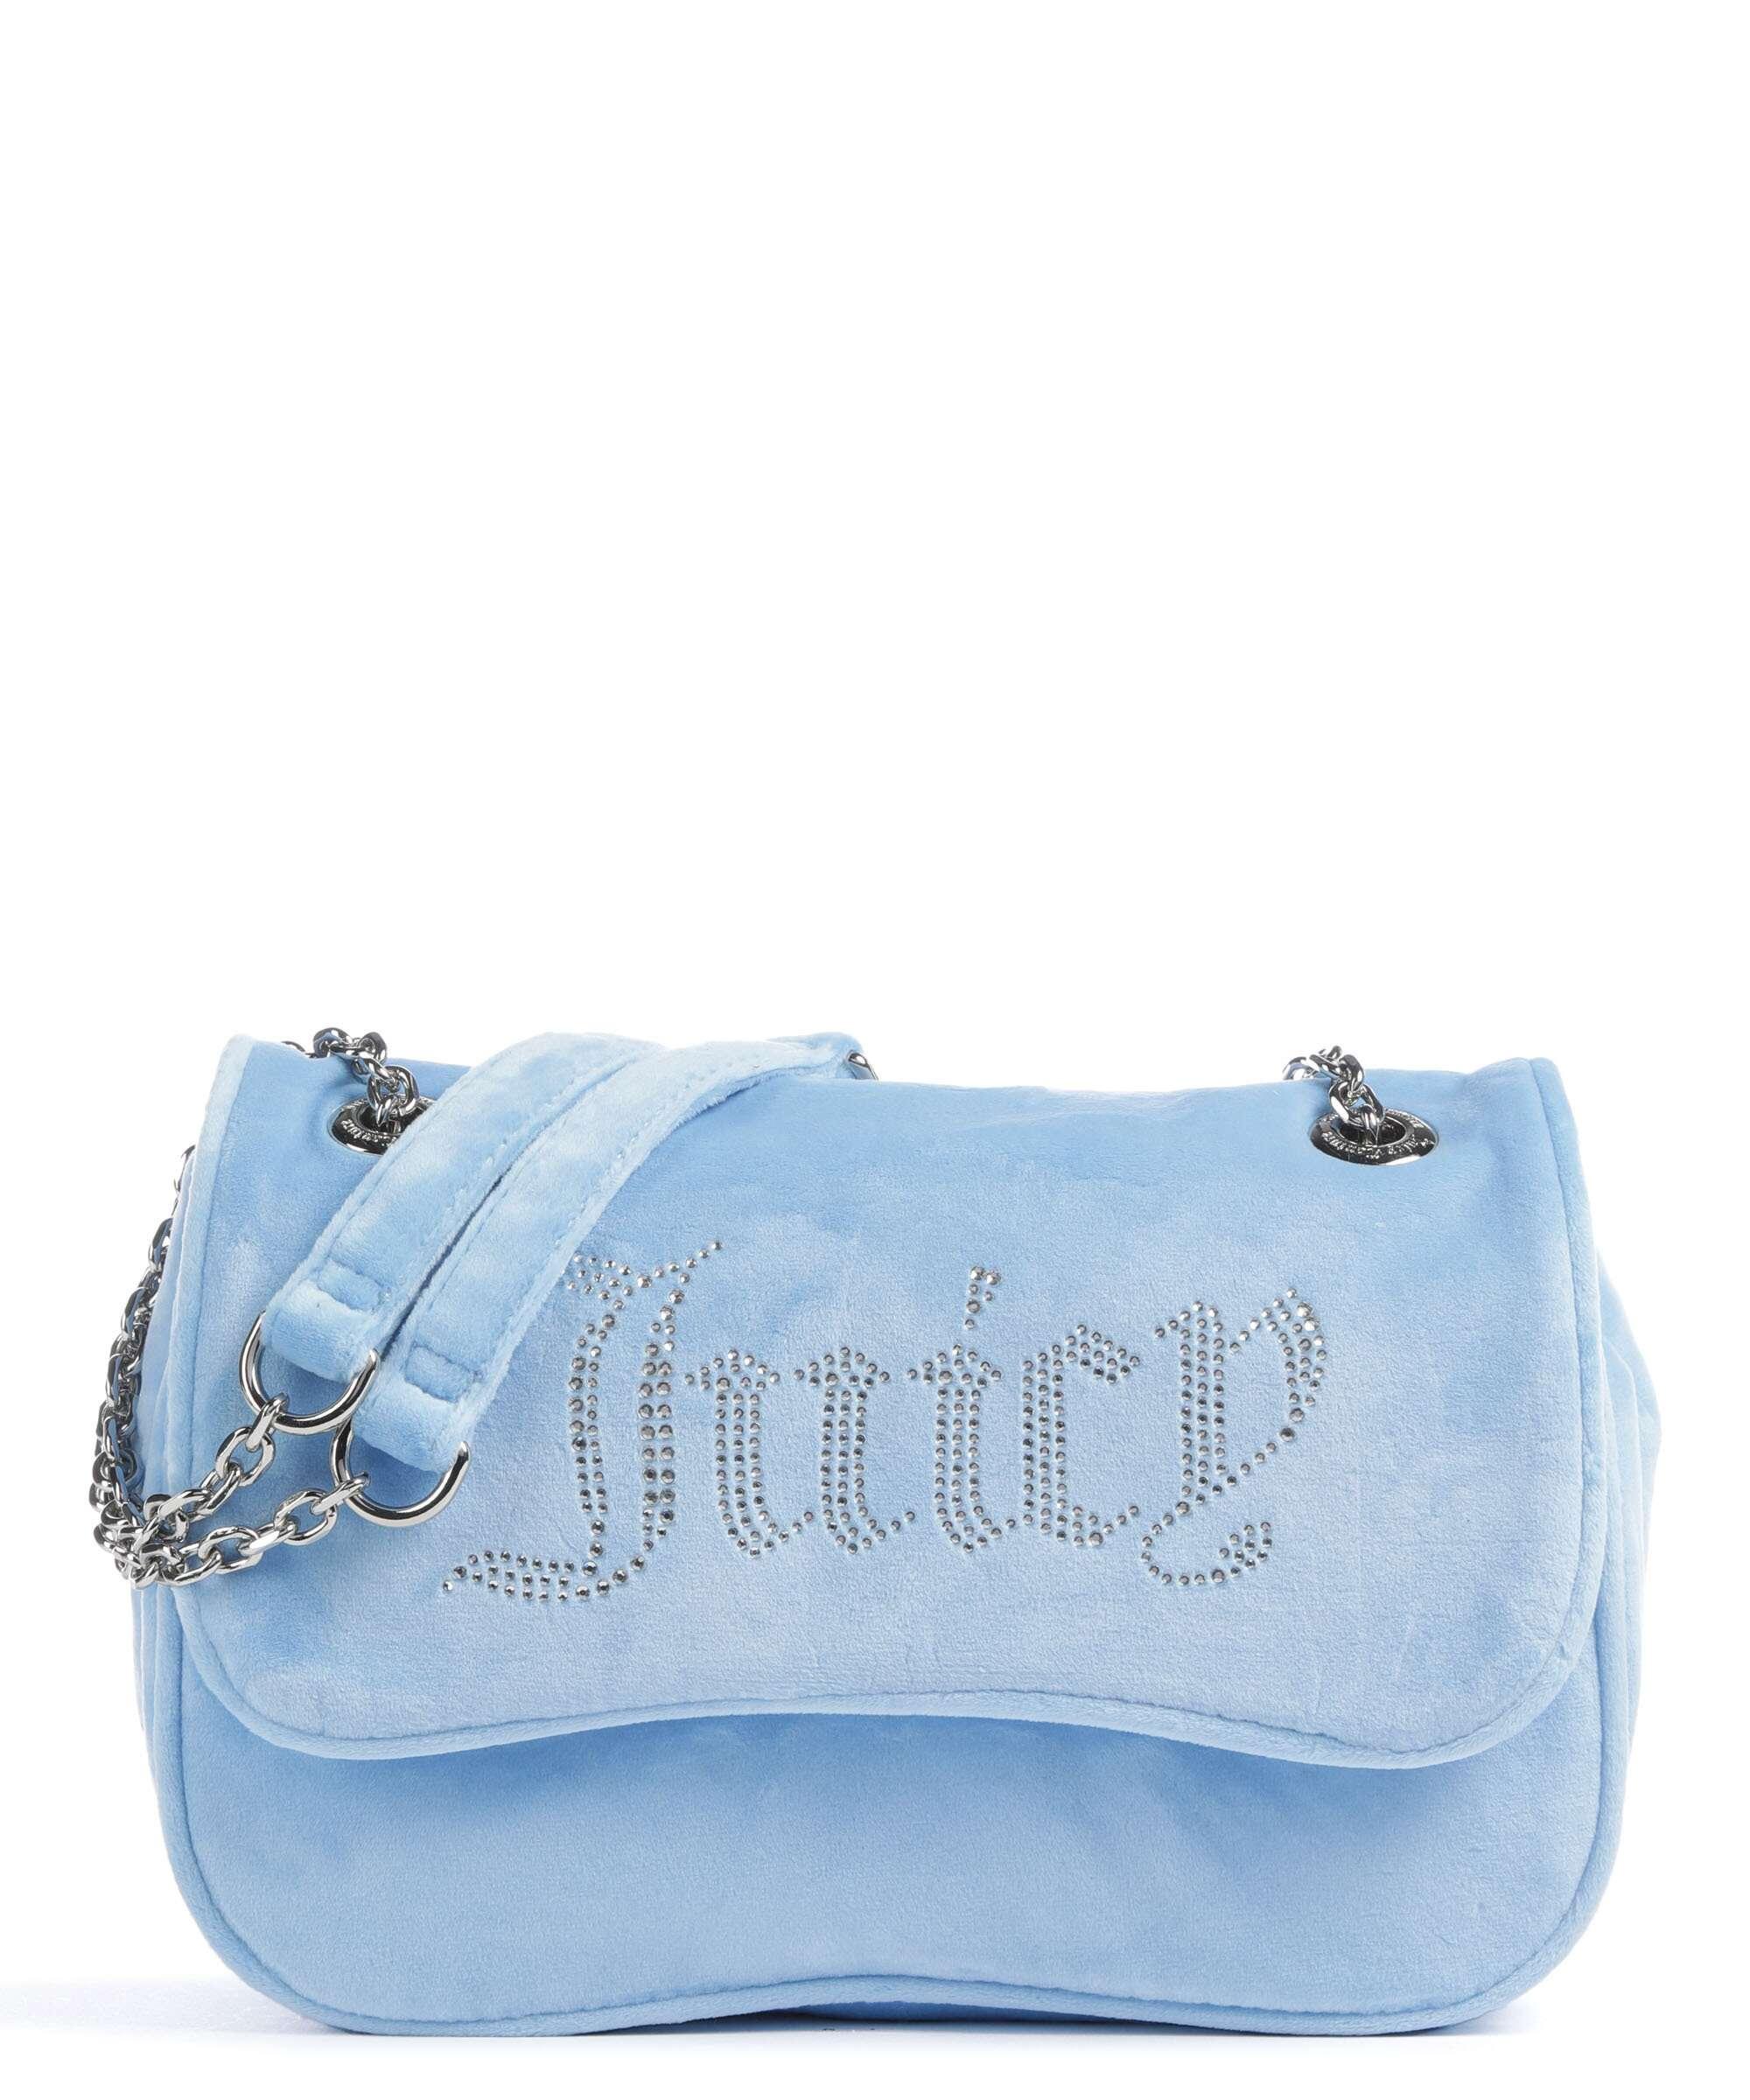 Blue cherry Juicy Couture purse 💙💛💙💛 | Juicy couture purse, Juicy  couture, Y2k fashion